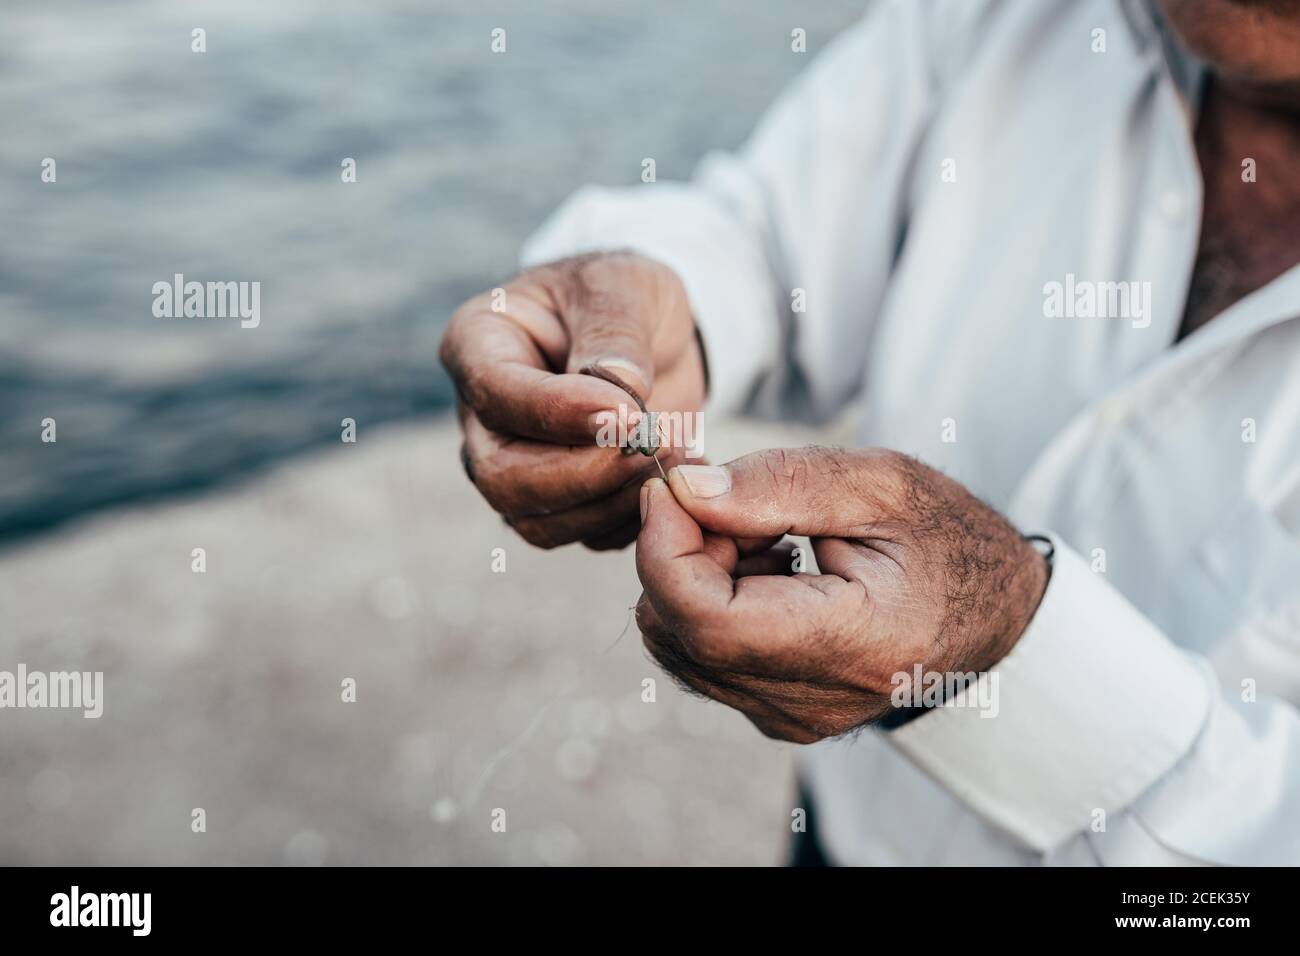 Crop hands of unrecognizable ethnic man holding plummet and preparing for fishing at water Stock Photo